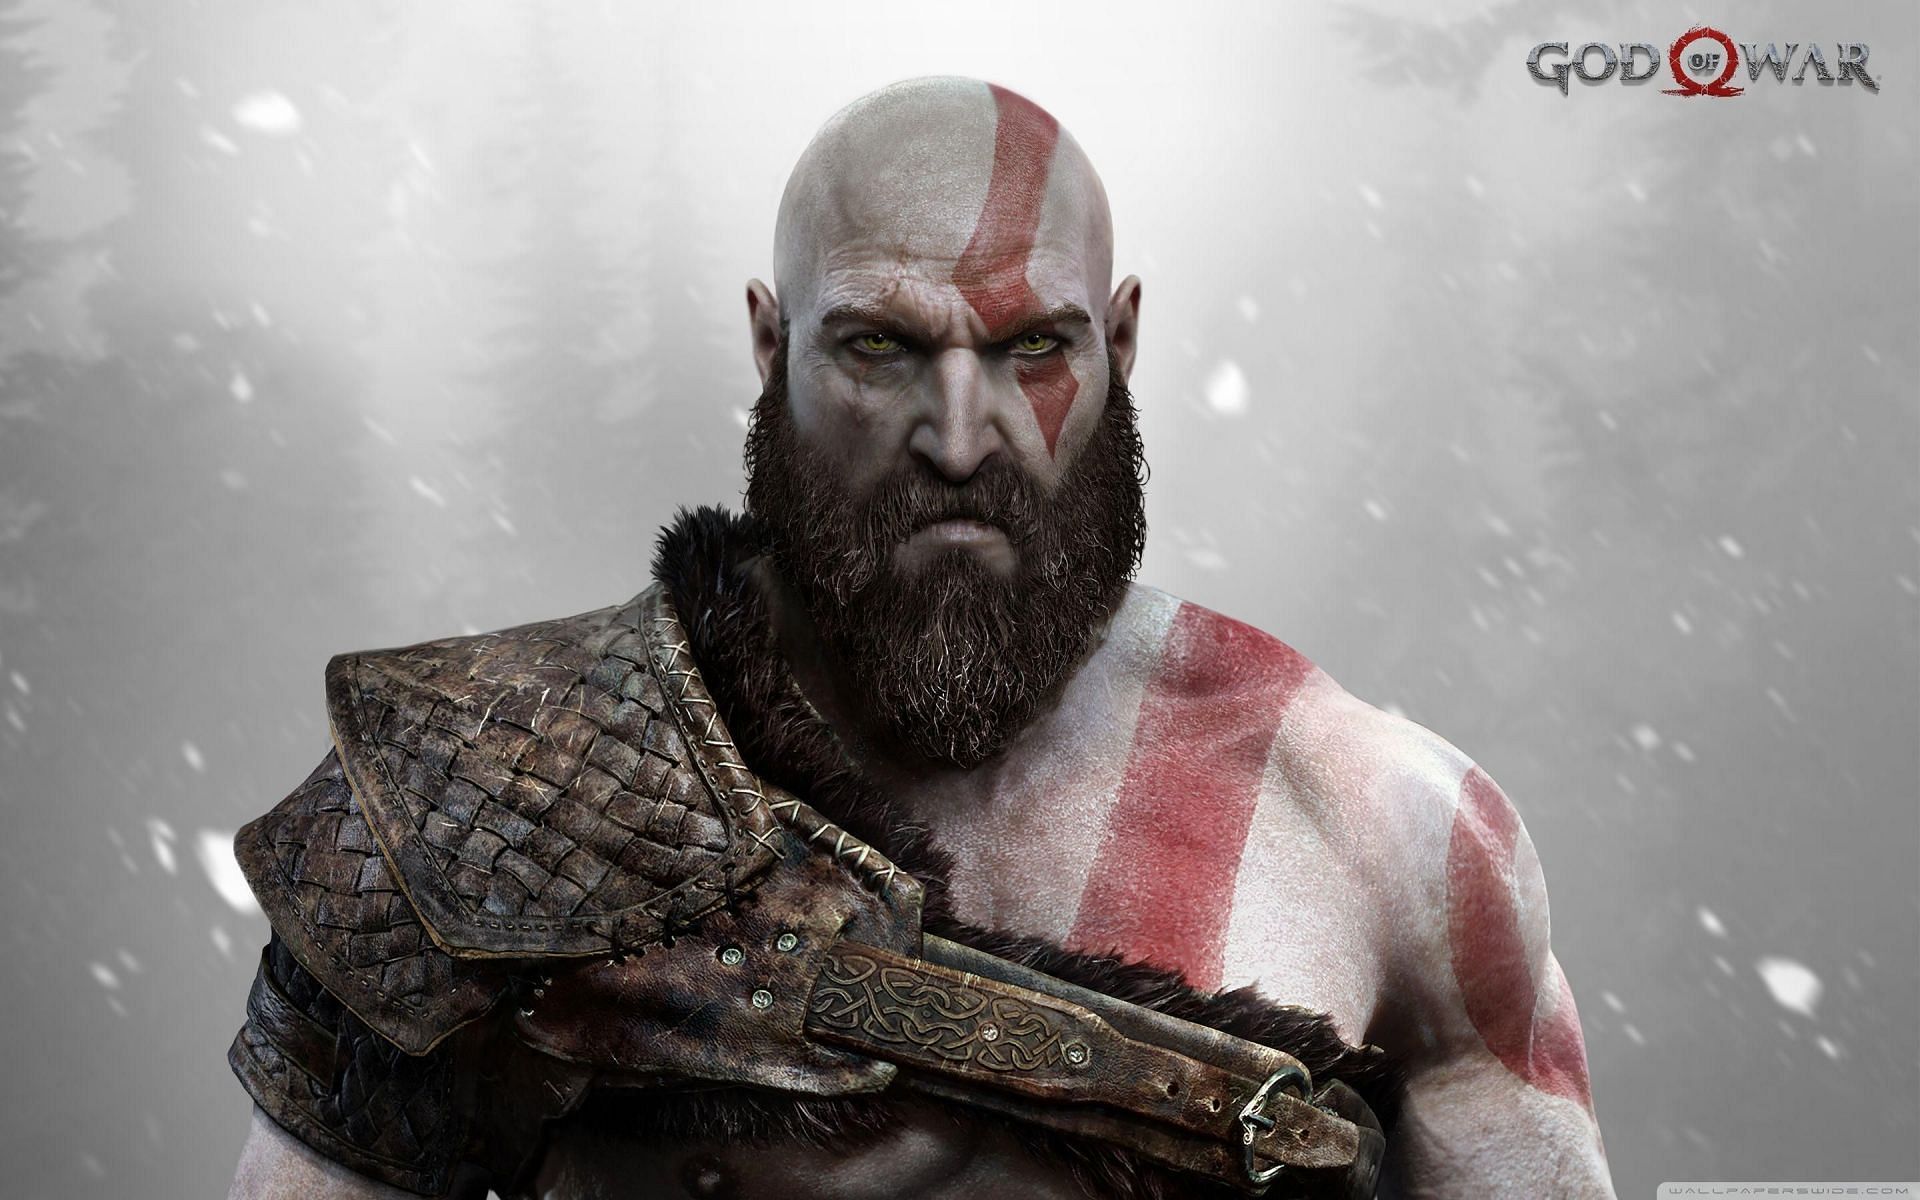 Mighty Kratos of Sparta is back to finish what he started (Image via God of War)